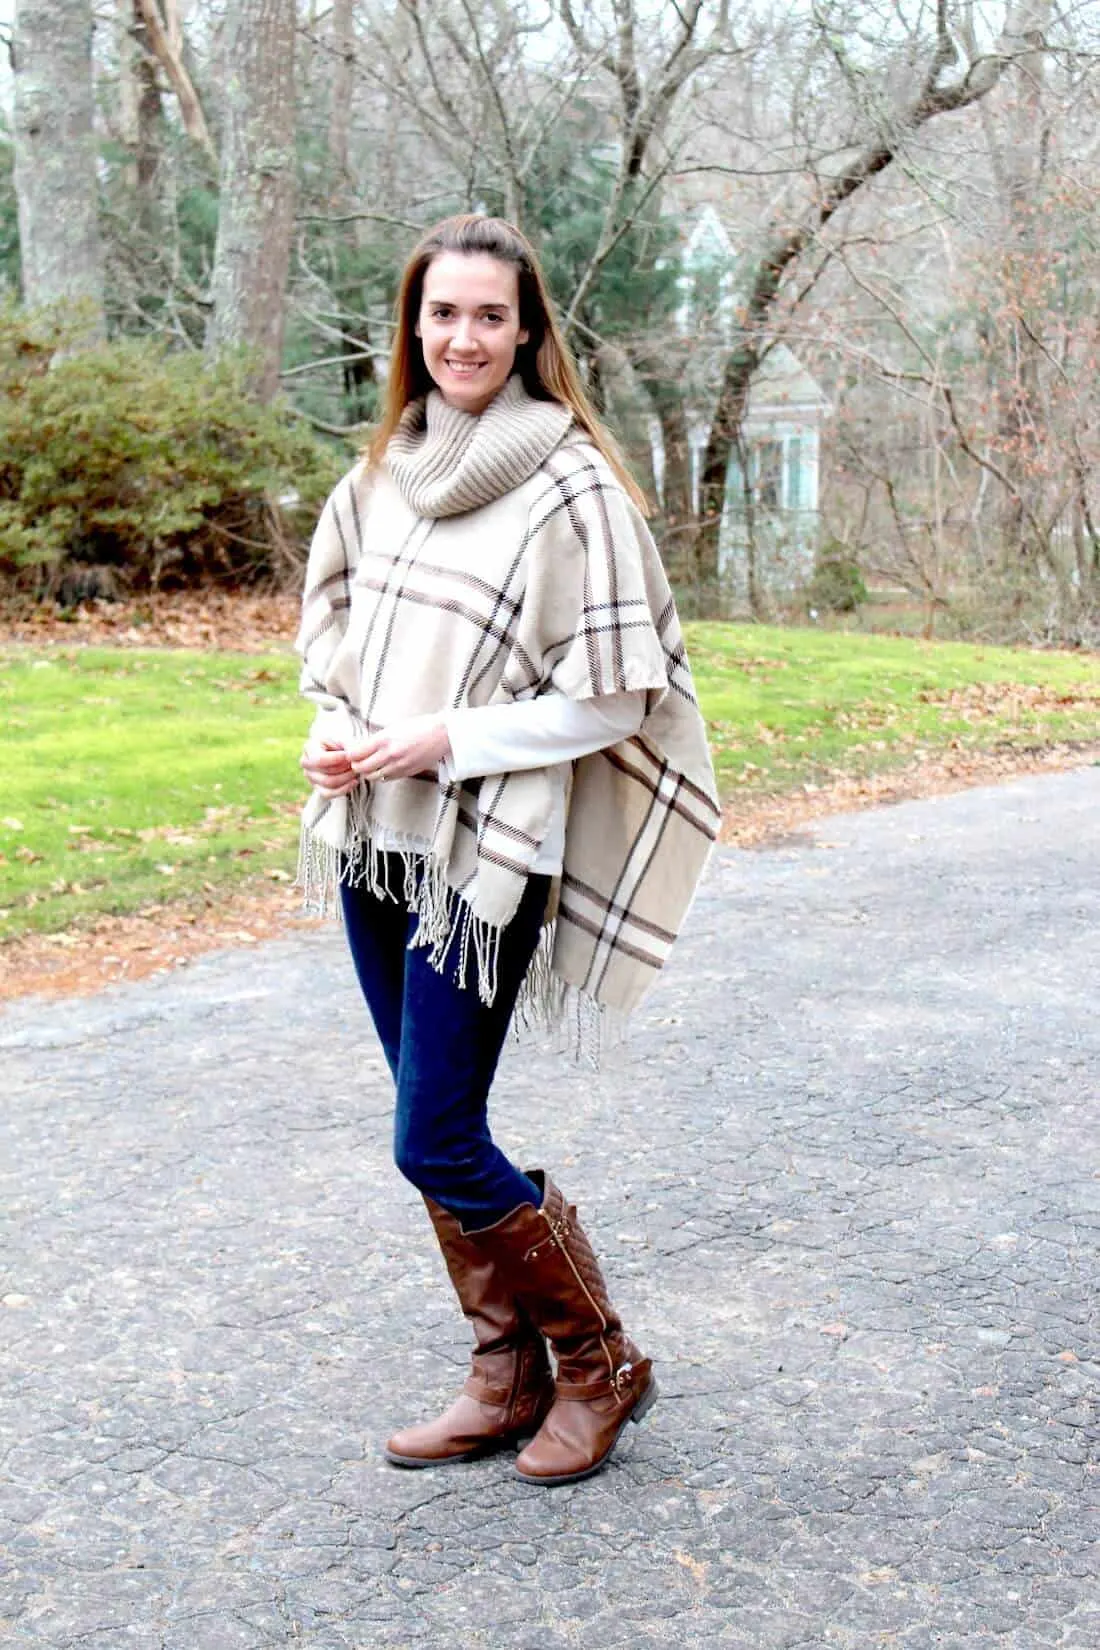 Ponchos are the easiest way to find some early pregnancy style, they make for great first trimester outfits!